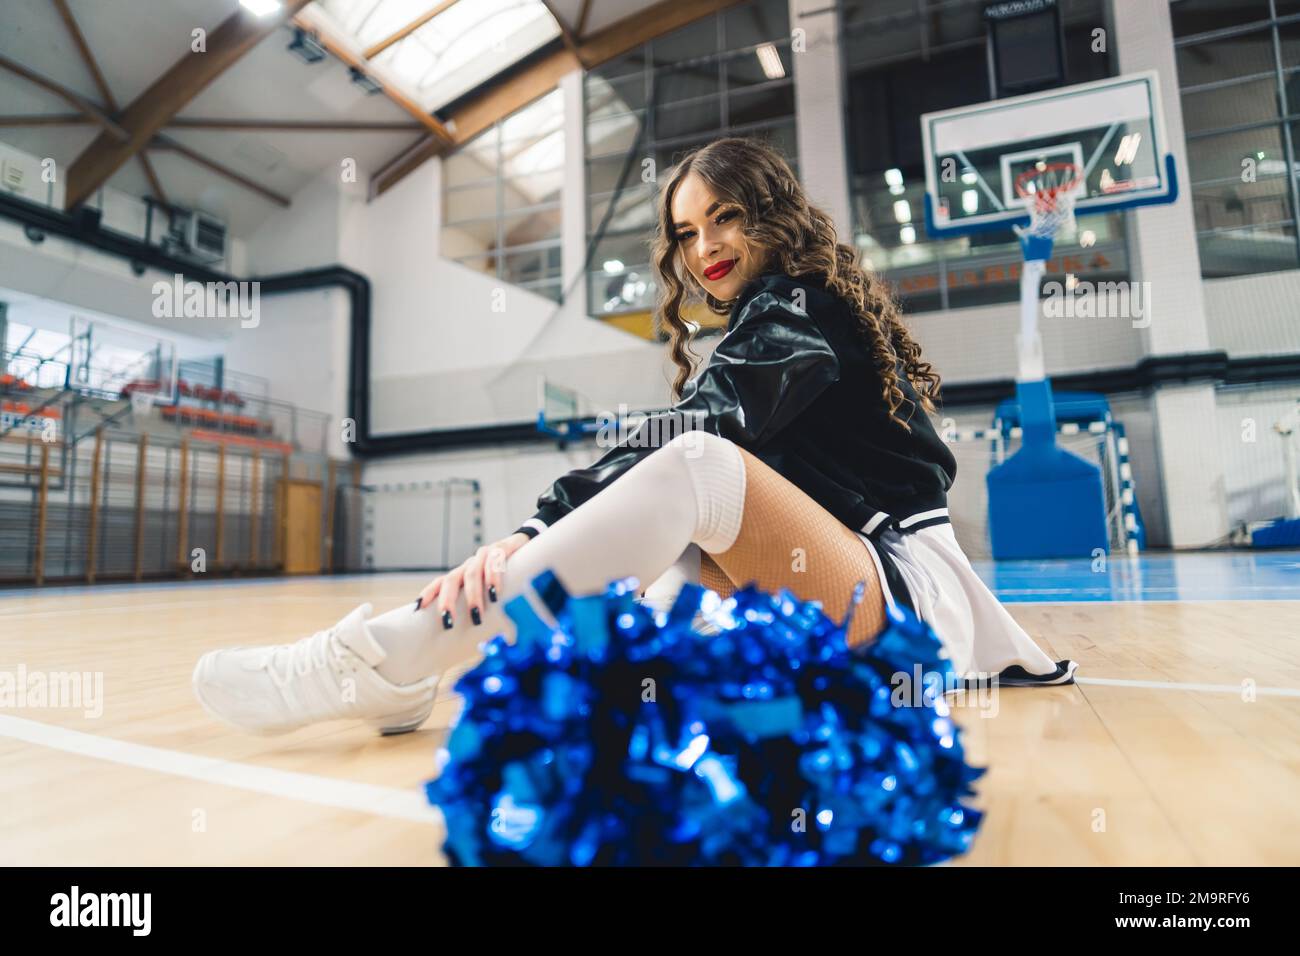 Brunette, curly-haired cheerleader in black and white uniform and jacket sitting on basketball court. Blue shiny pom-pom blurred in the foreground. High quality photo Stock Photo